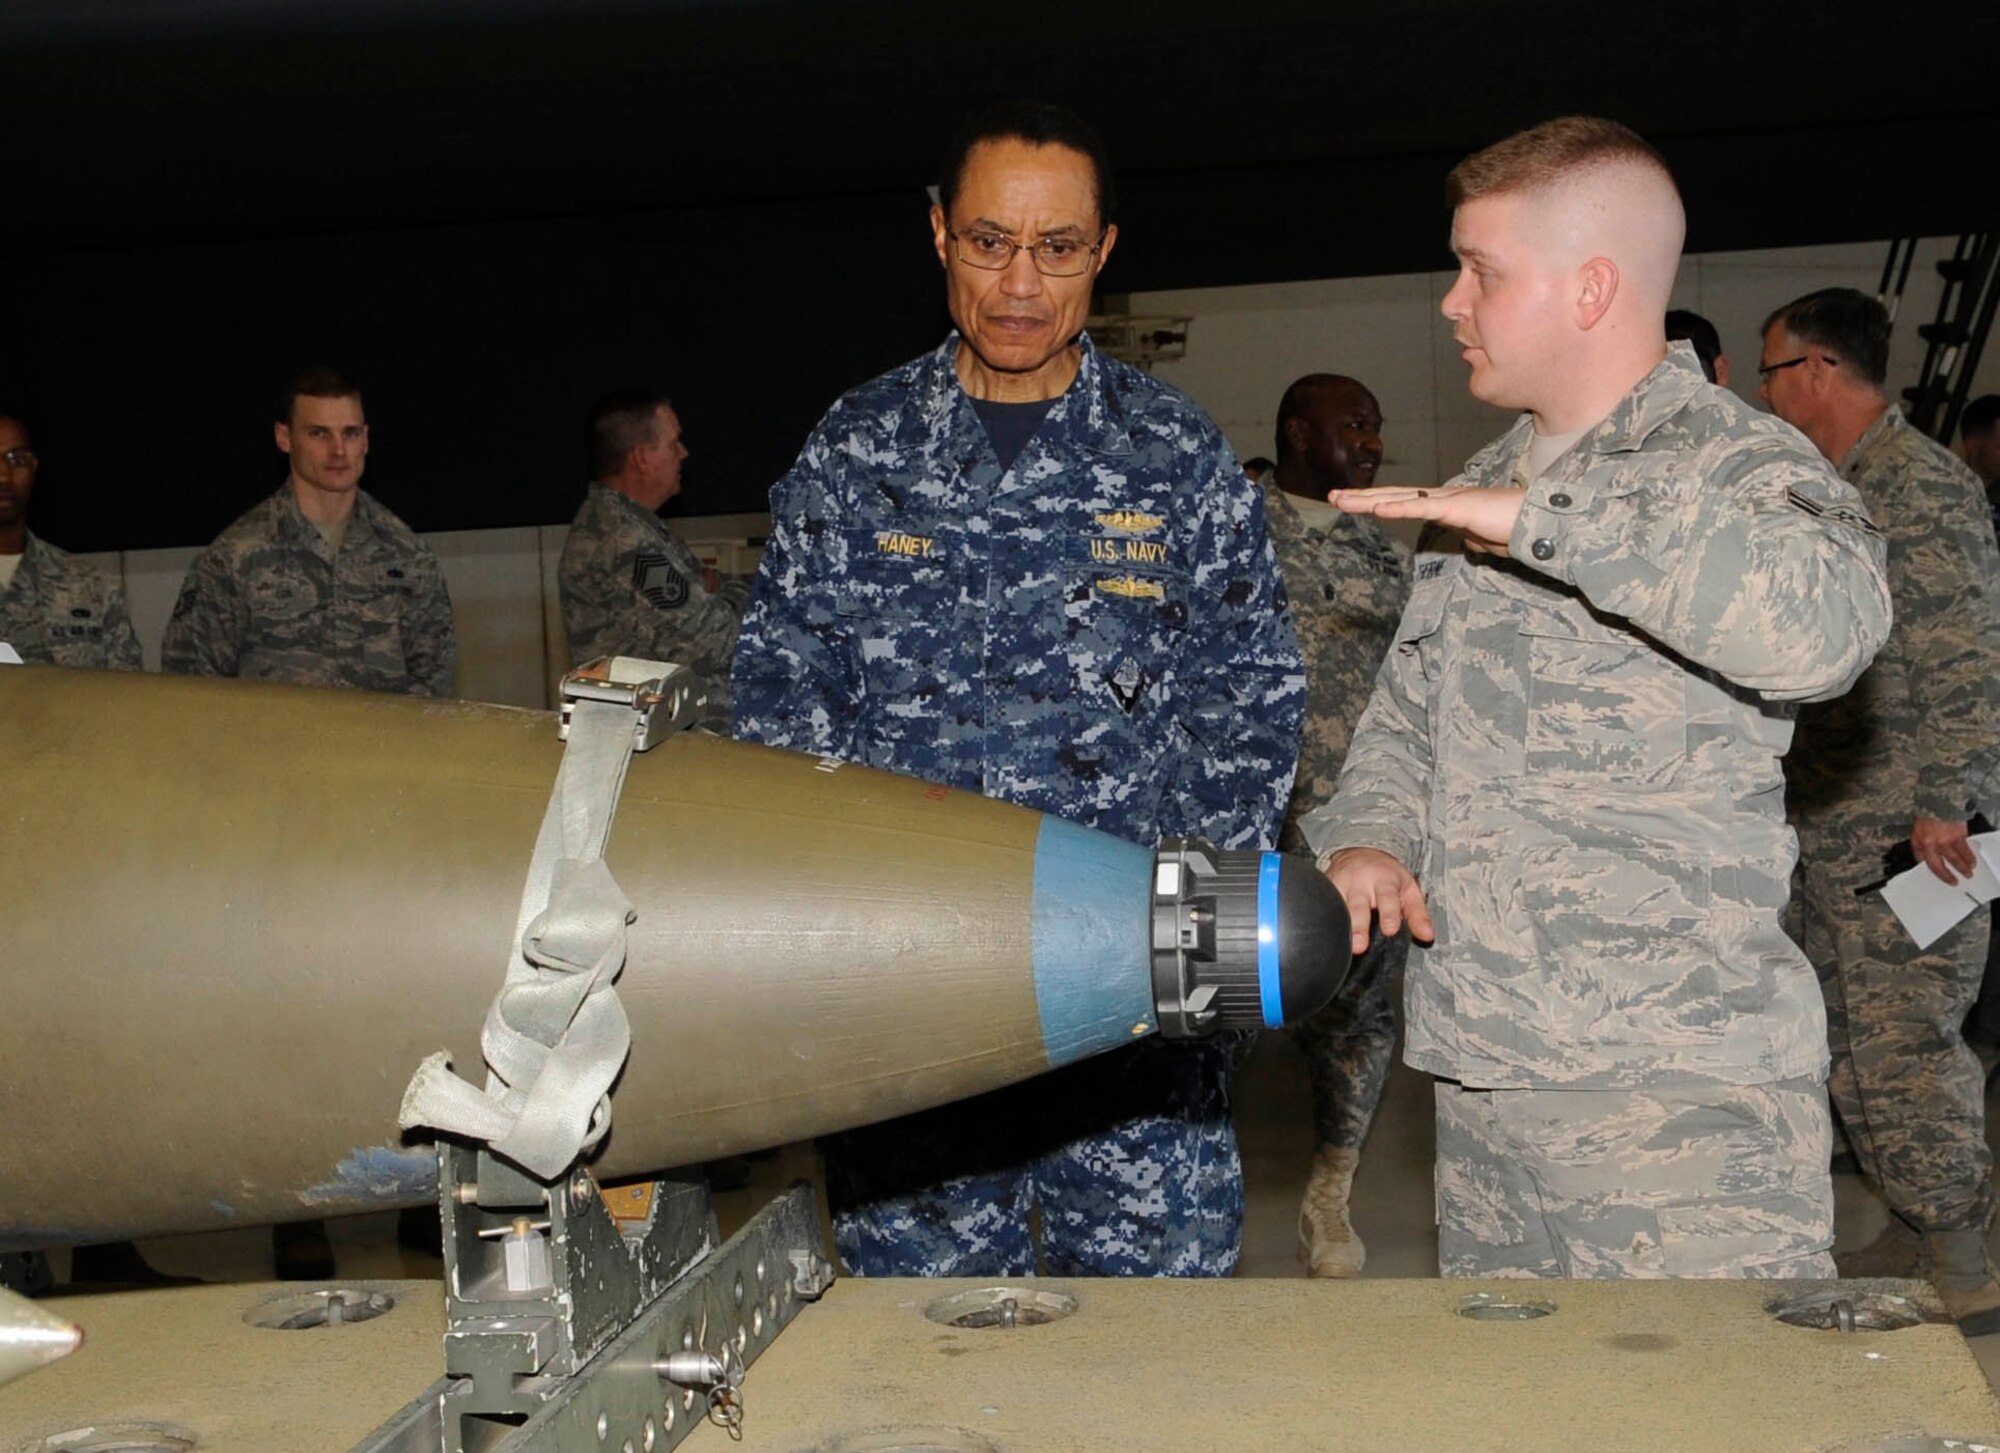 Airman 1st Class James Thorne, 509th Munitions Squadron conventional maintenance crew member, explains the specifics of a 2,000-pound GBU-31 joint direct attack munition to U.S. Navy Adm. Cecil D. Haney, commander of U.S. Strategic Command, at Whiteman Air Force Base, Mo., March 10, 2014. During Haney’s visit here, he stressed the importance of Whiteman’s contributions to the command’s deterrence and assurance mission. (U.S. Air Force photo by Staff Sgt. Alexandra M. Boutte/Released)